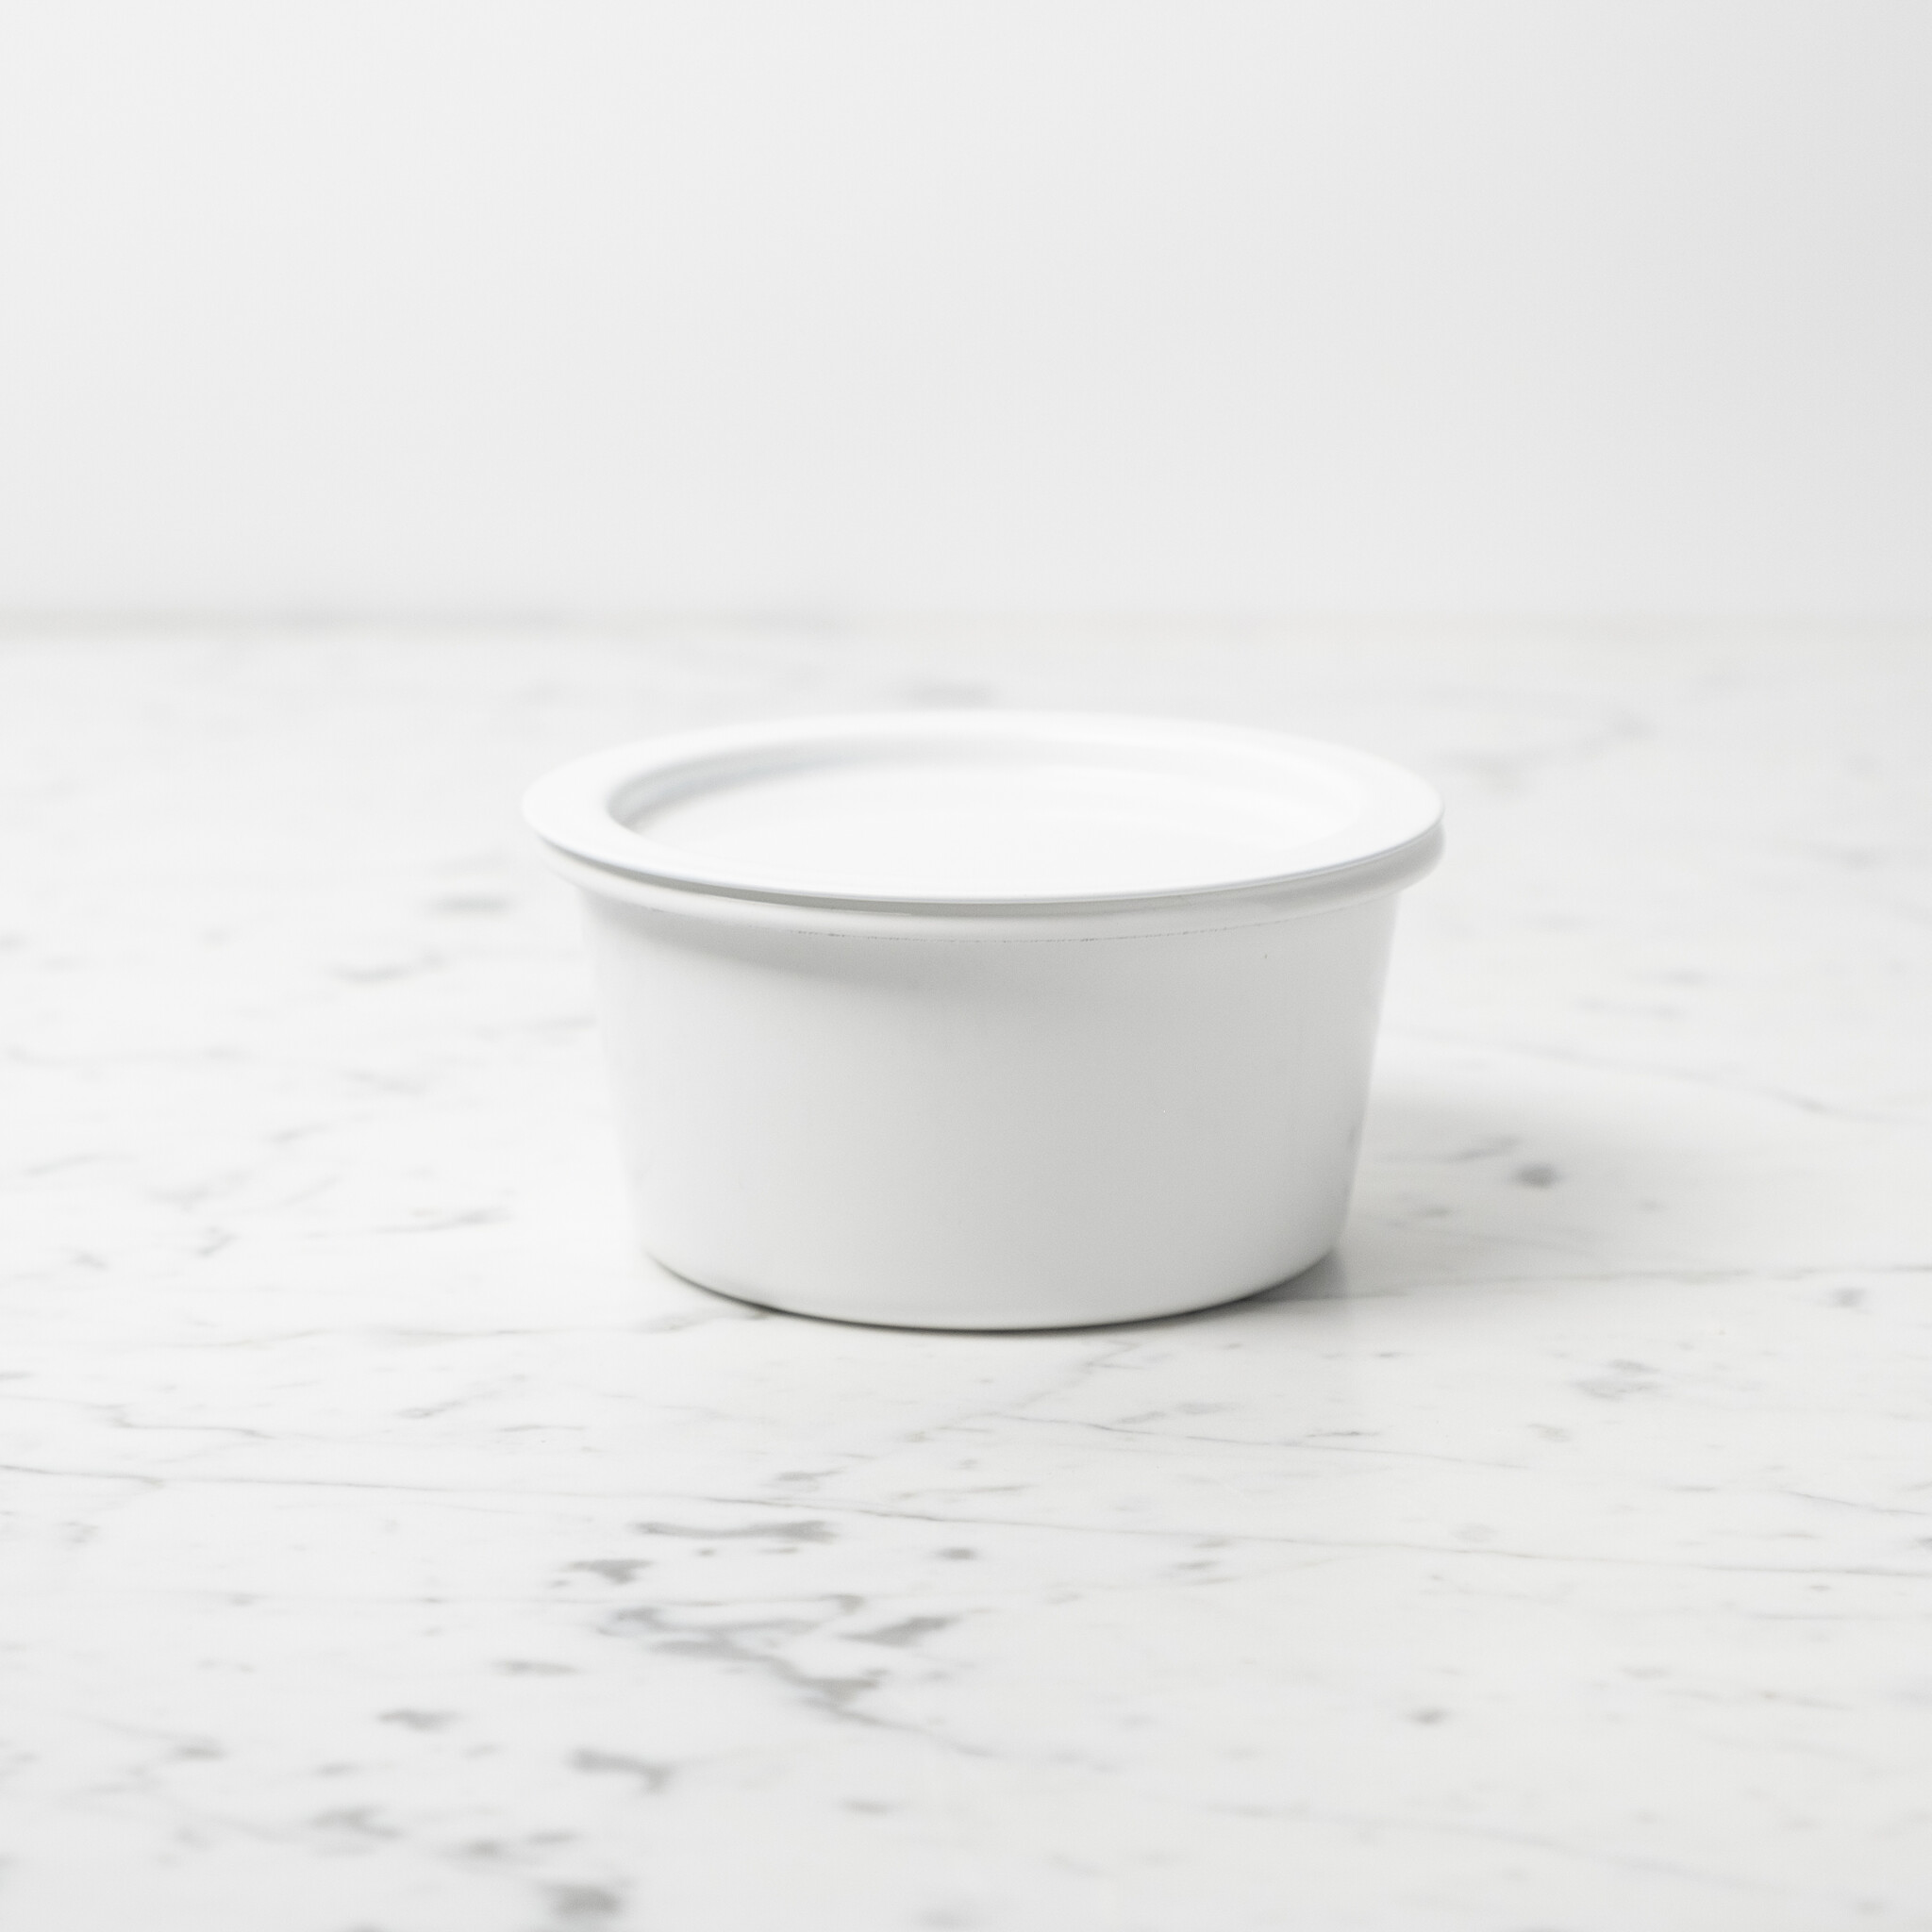 Japanese White Enamel Container - Small - 4.75 x 2.5"